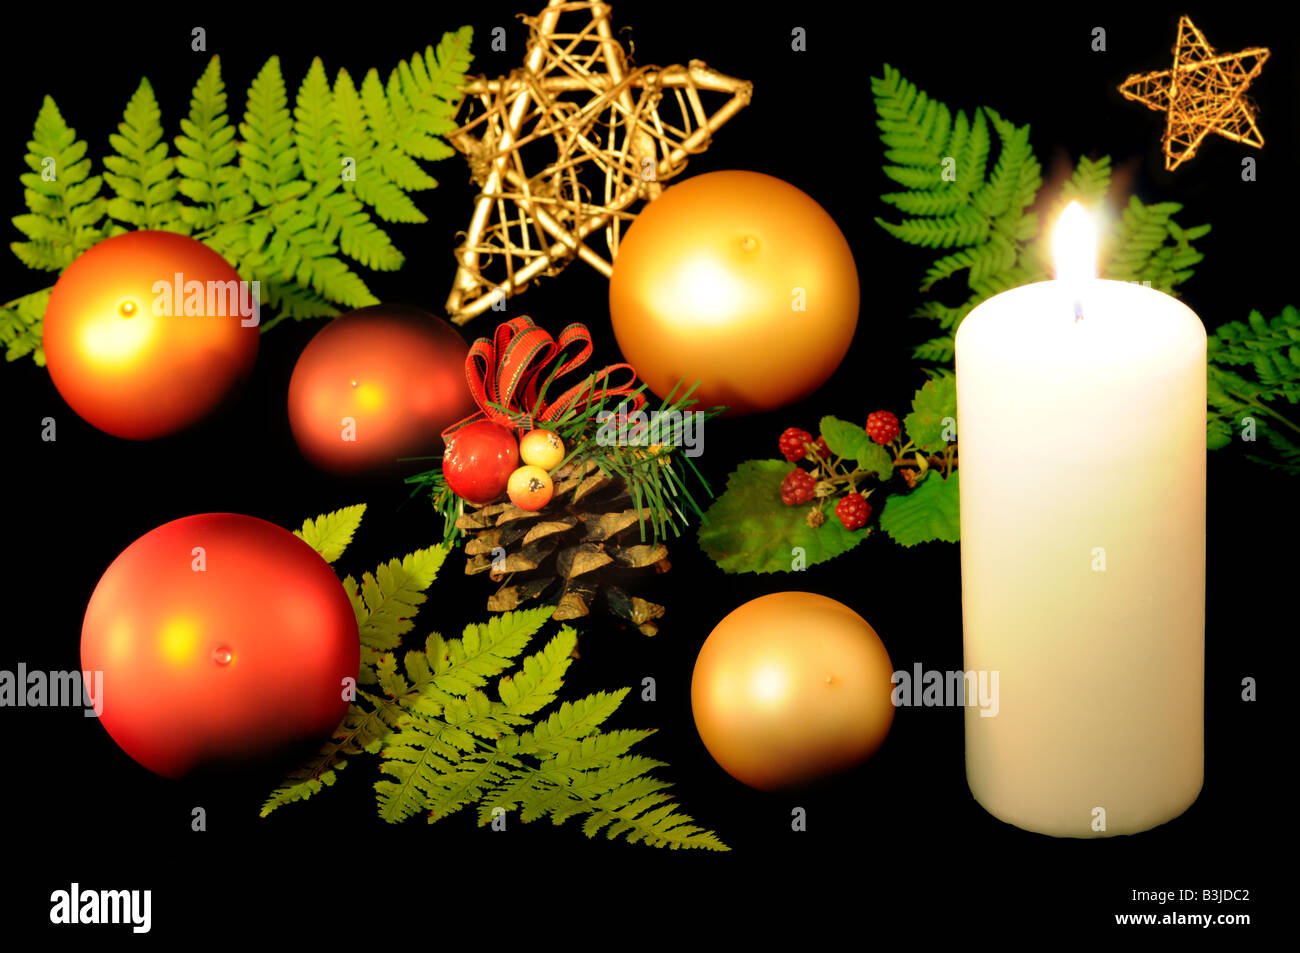 Christmas still life with decorative balls, fern, cone and burning candle. Stock Photo